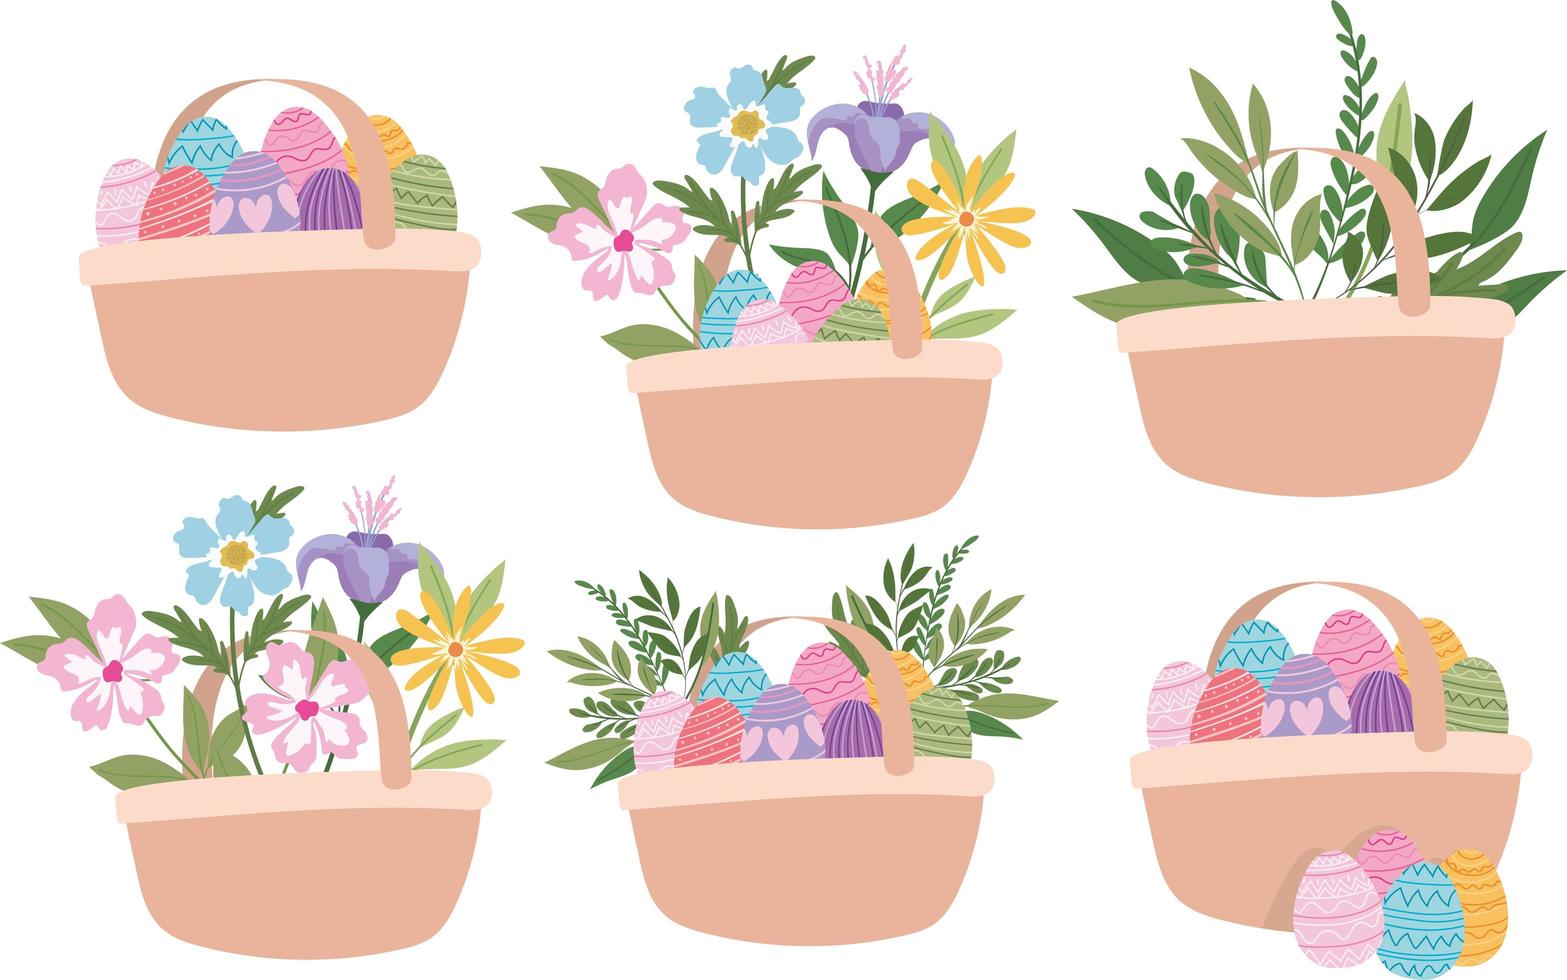 baskets full of easter eggs, flowers and green plants vector